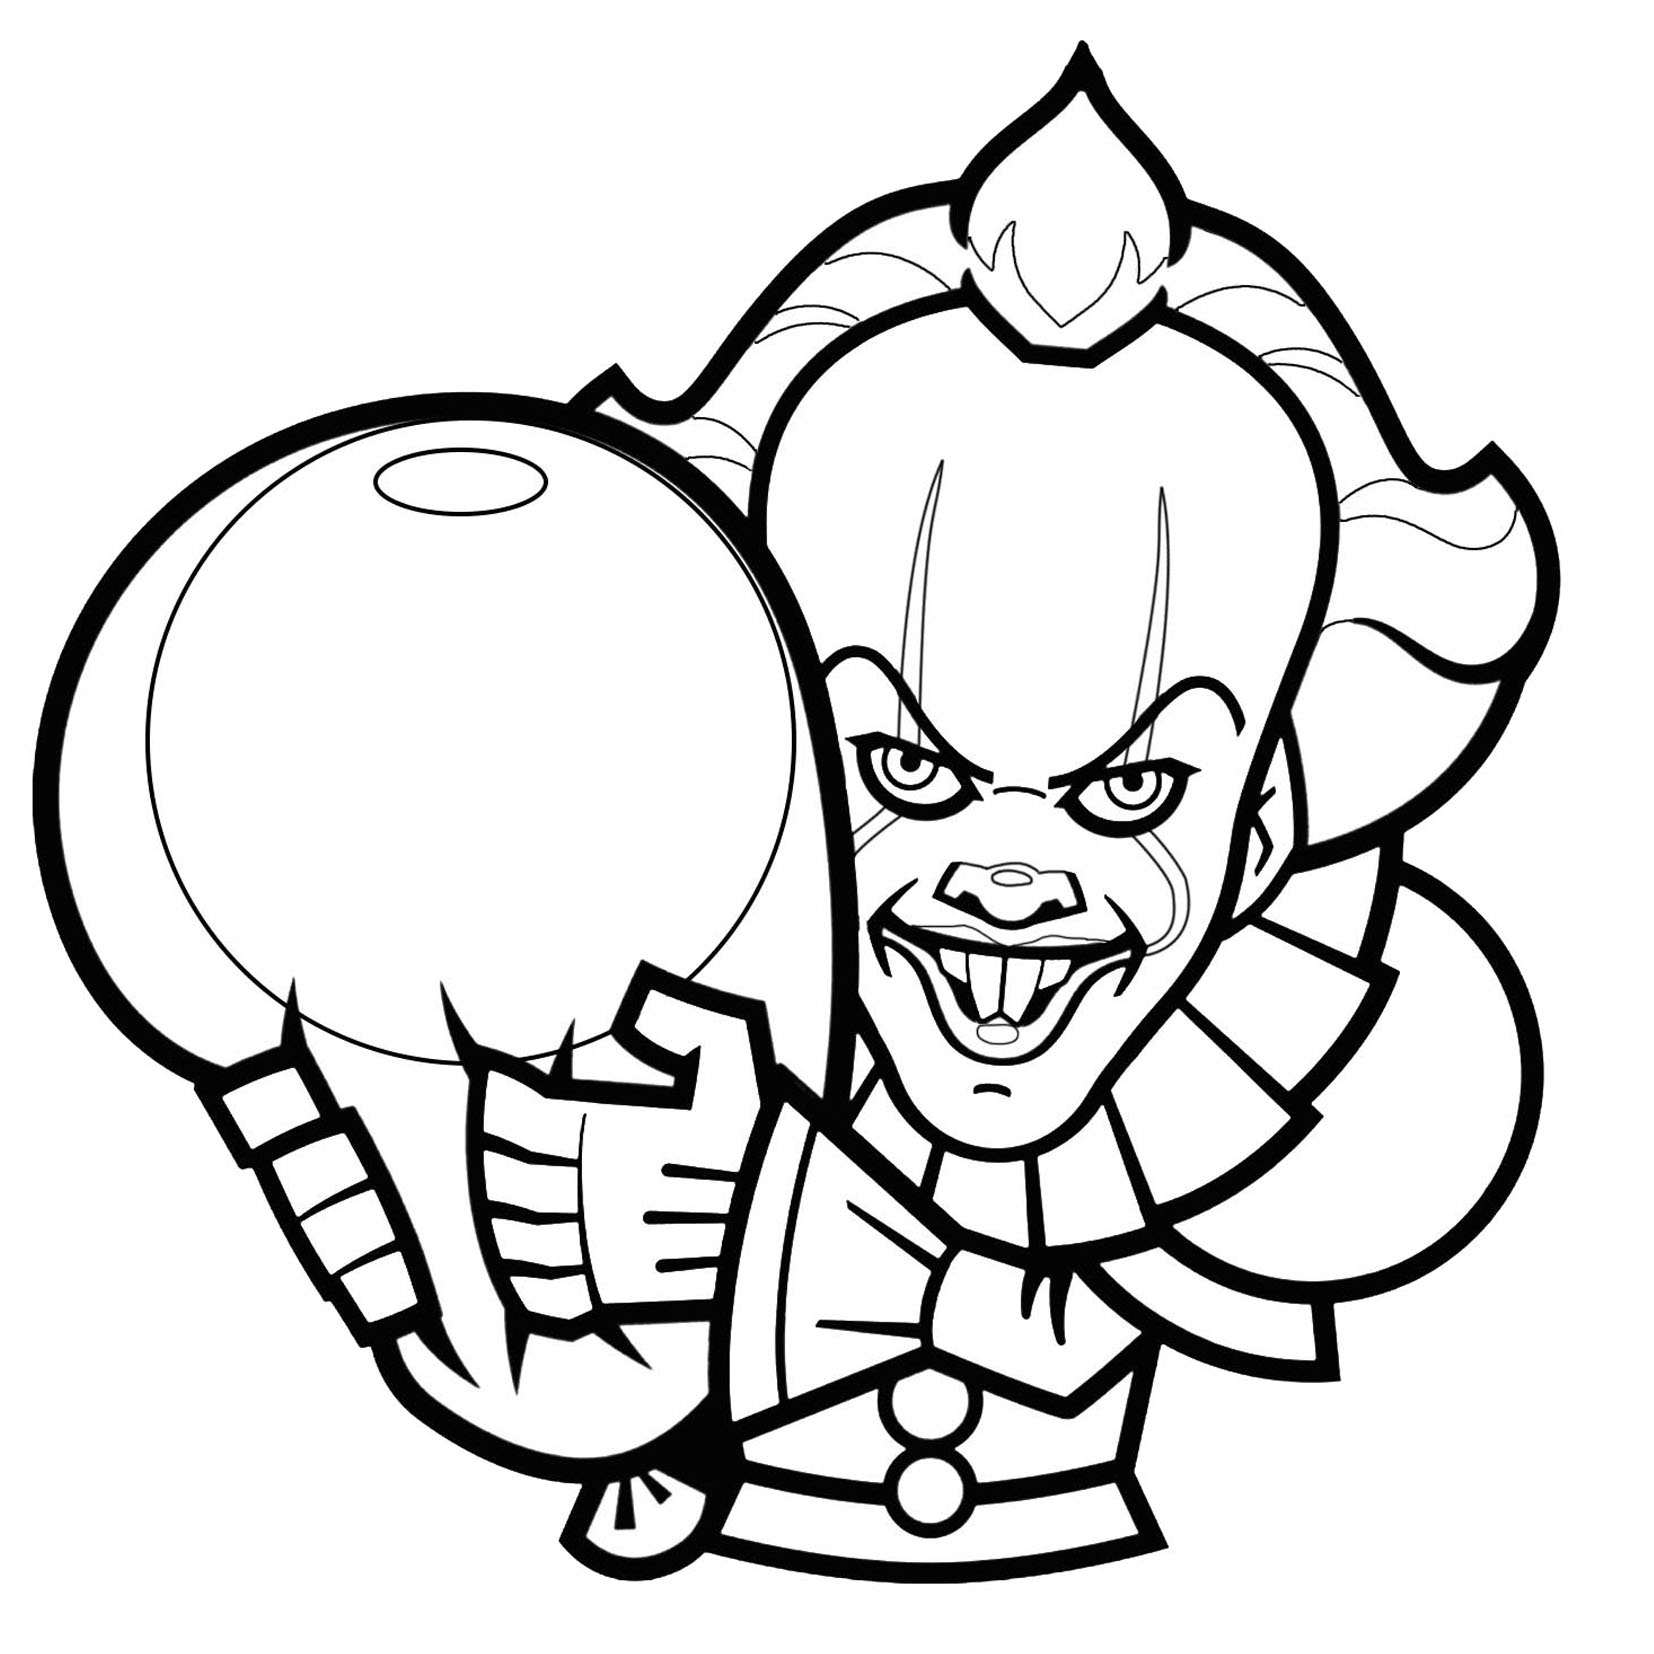 Horror it clown pennywise - Dia das Bruxas - Coloring Pages for Adults